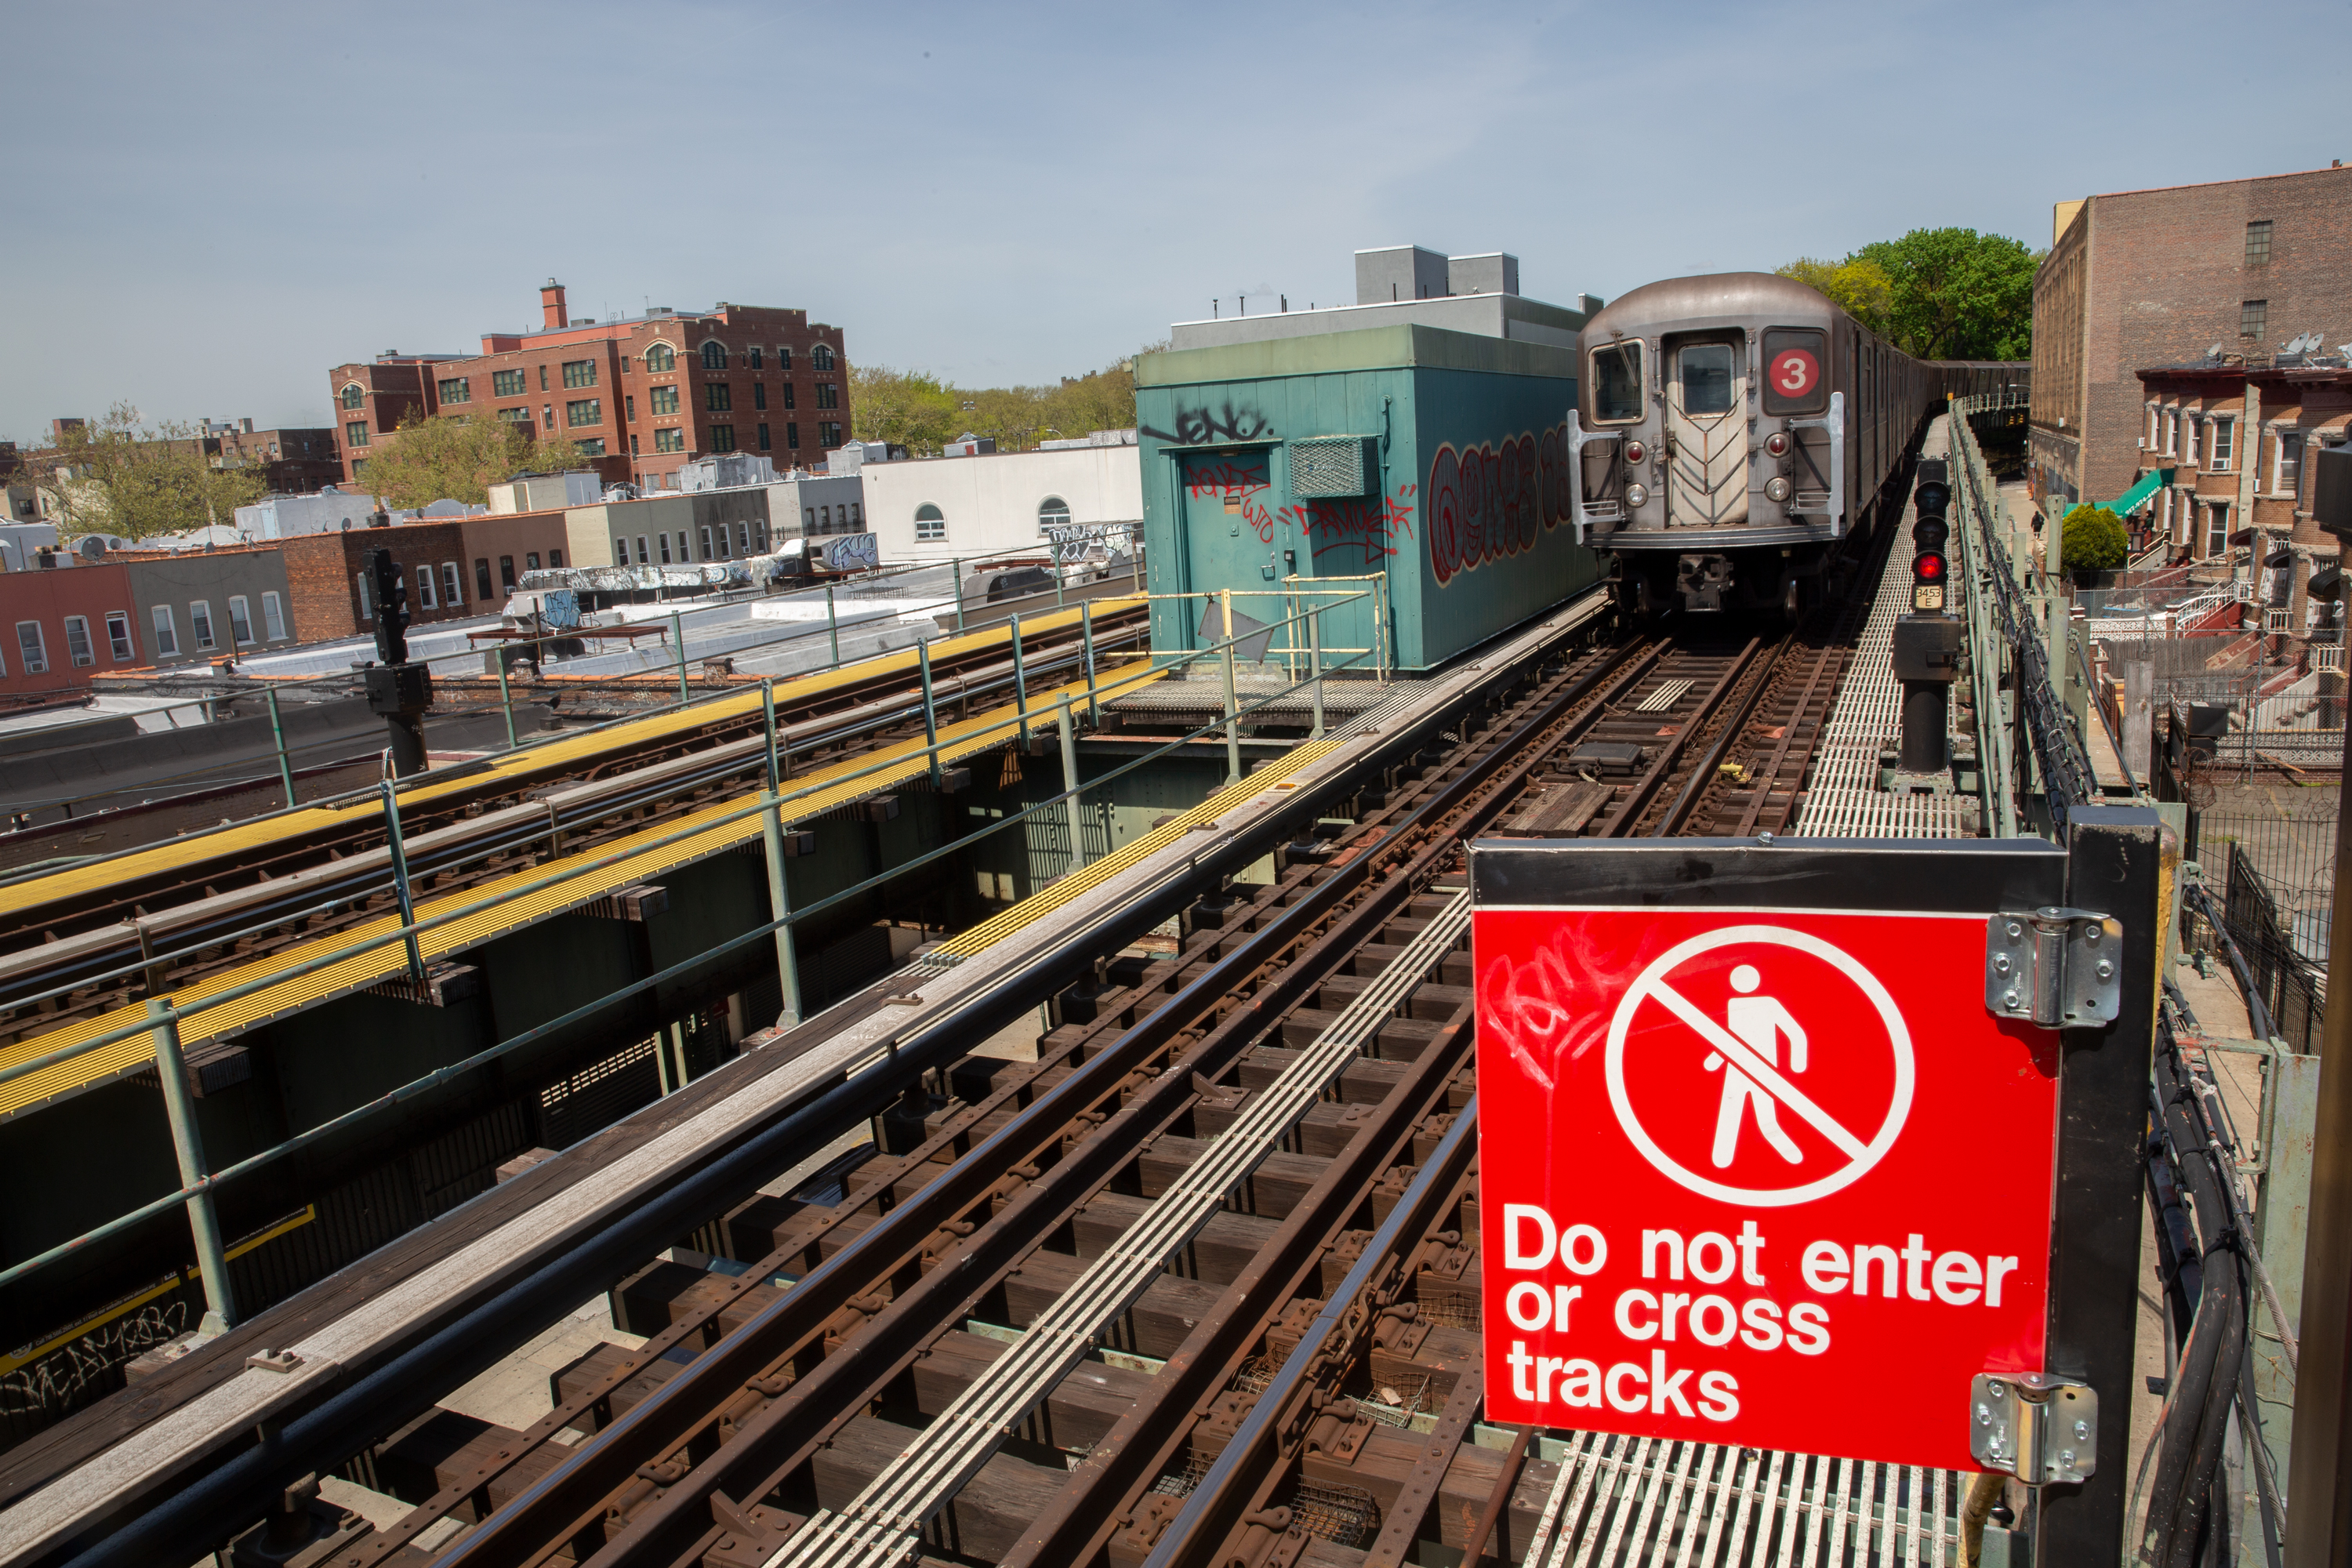 The Sutter Avenue station in Brooklyn where two French artists’ bodies were found in April. May 5, 2022.